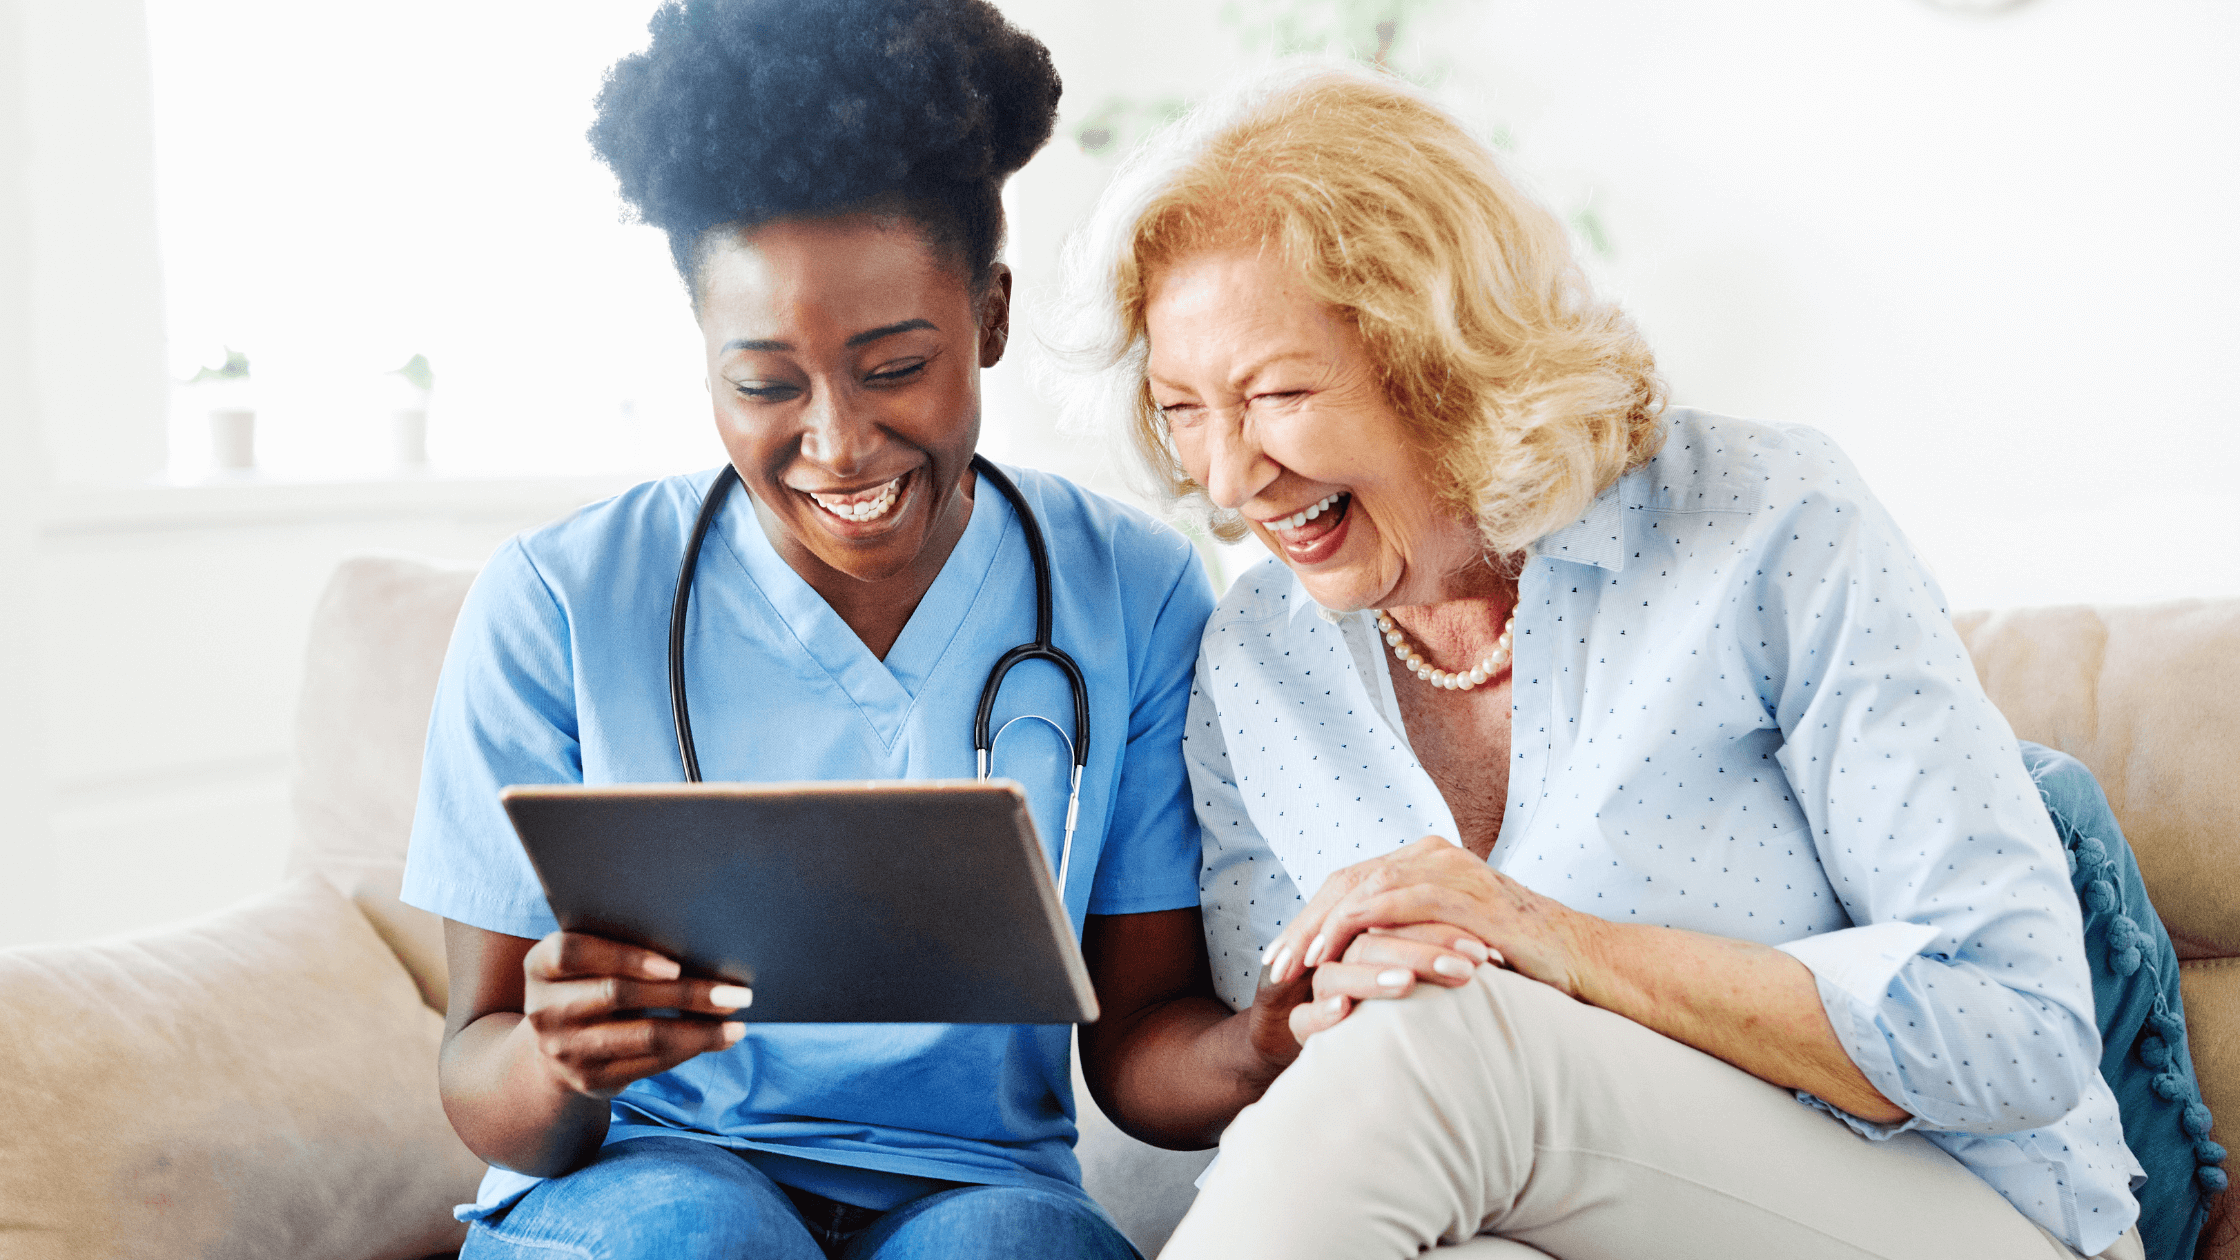 Woman of color caregiver holding a tablet with senior woman sitting beside on couch